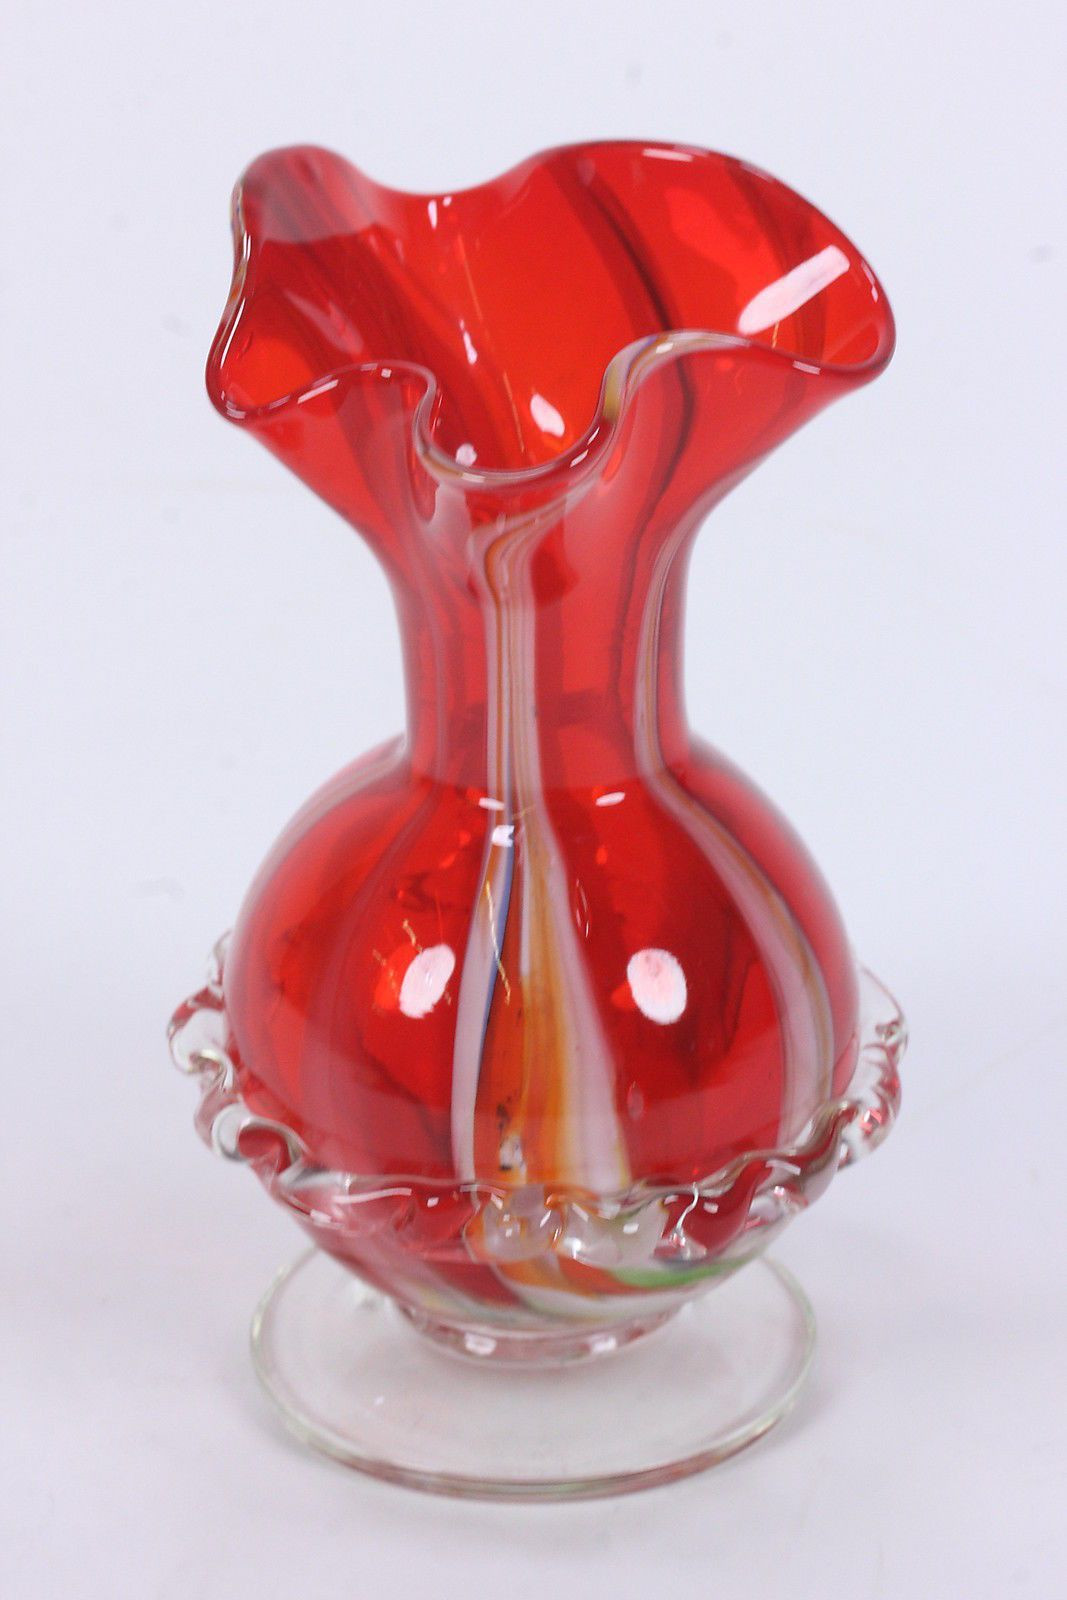 19 Trendy Red Cut Glass Vase 2024 free download red cut glass vase of red striped studio art glass vase hand blown 6 1 8 free form with red striped studio art glass vase hand blown 6 1 8 free form ruffled